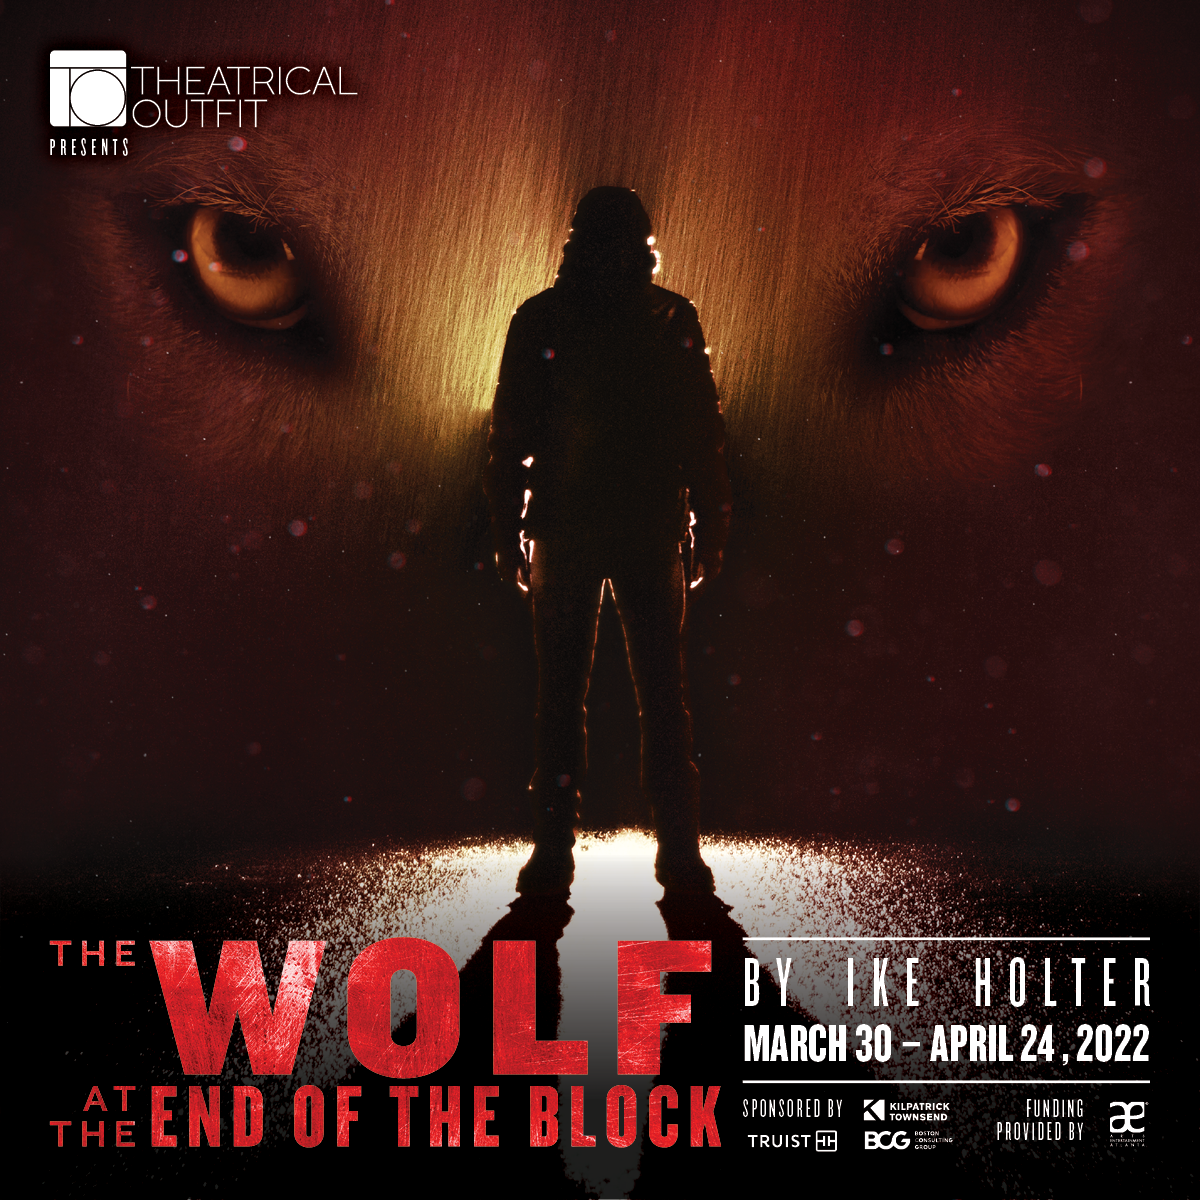 The Wolf at the End of the Block poster Theatrical Outfit